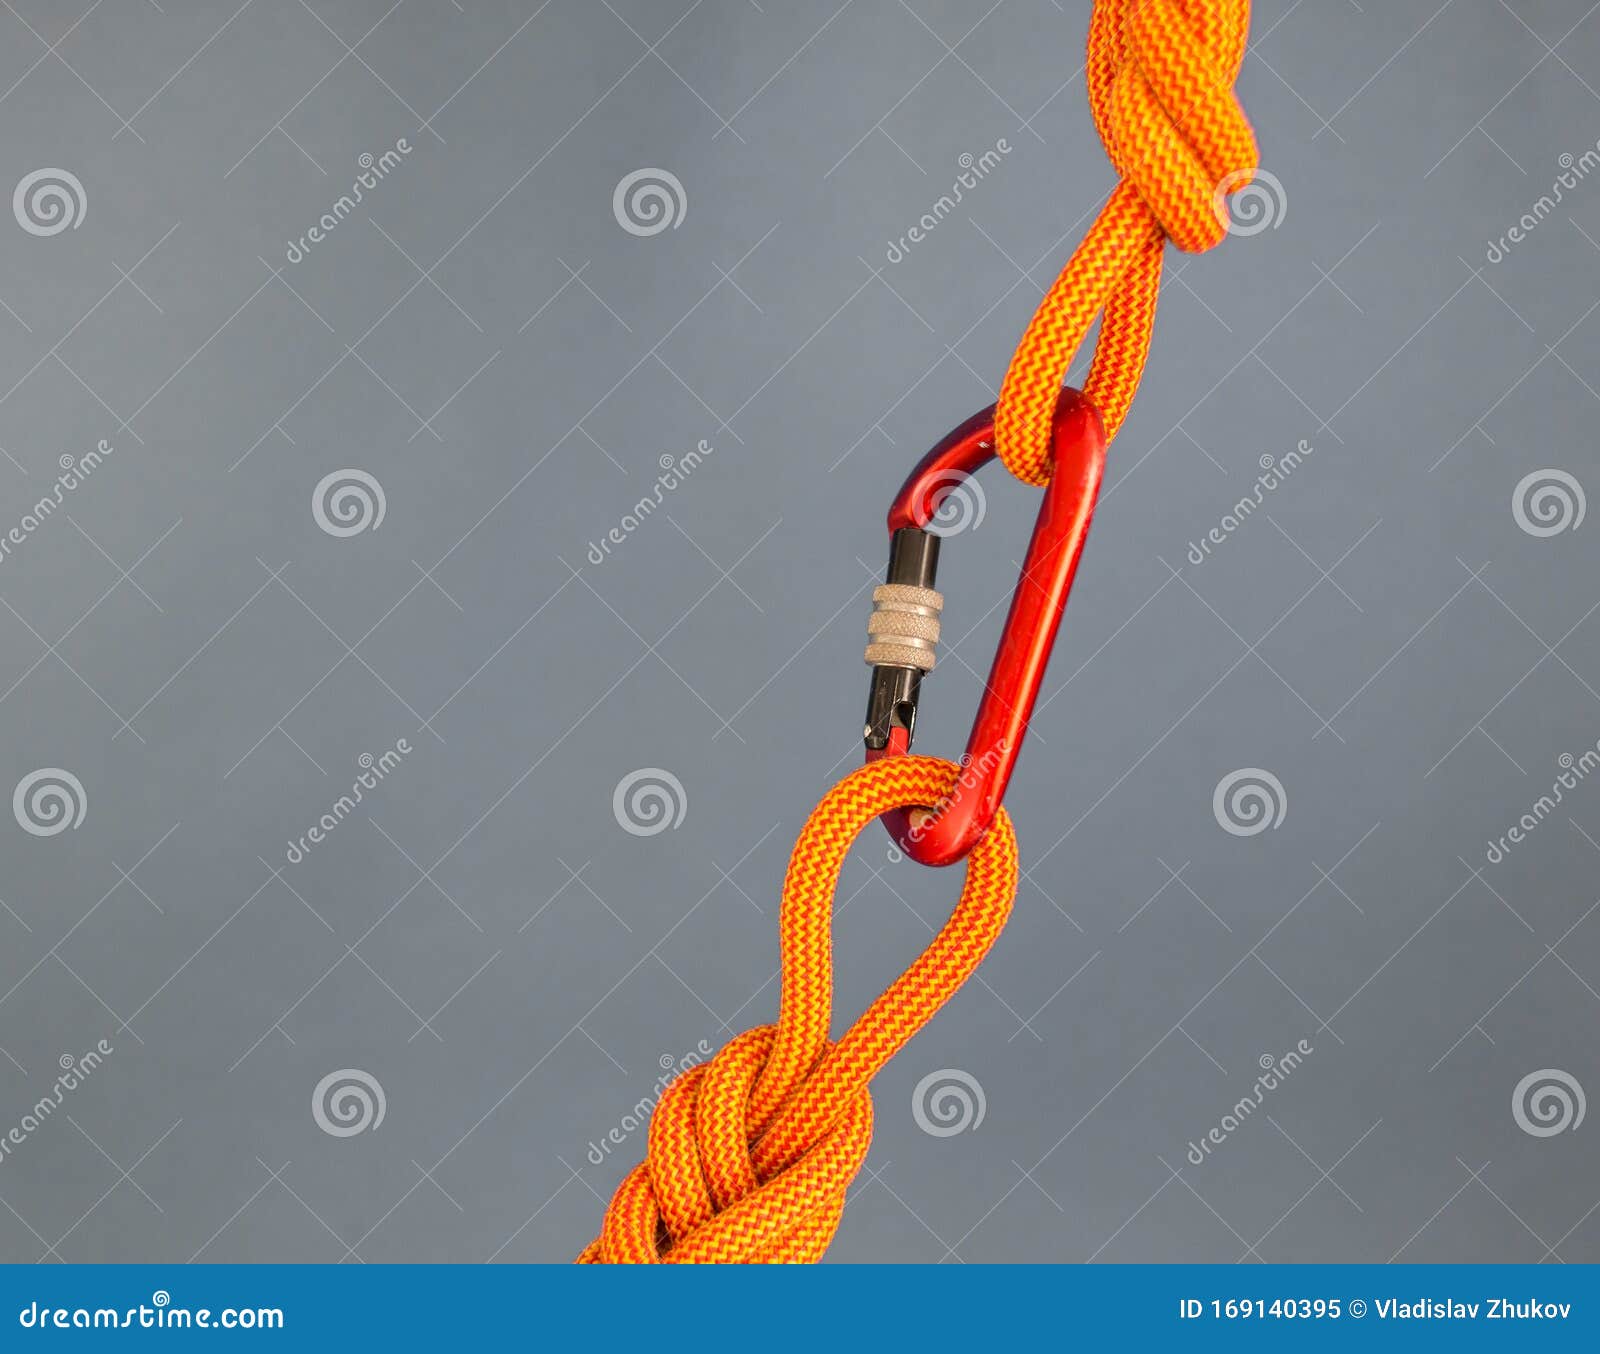 Two Knots Connected by a Carbine Stock Image - Image of background